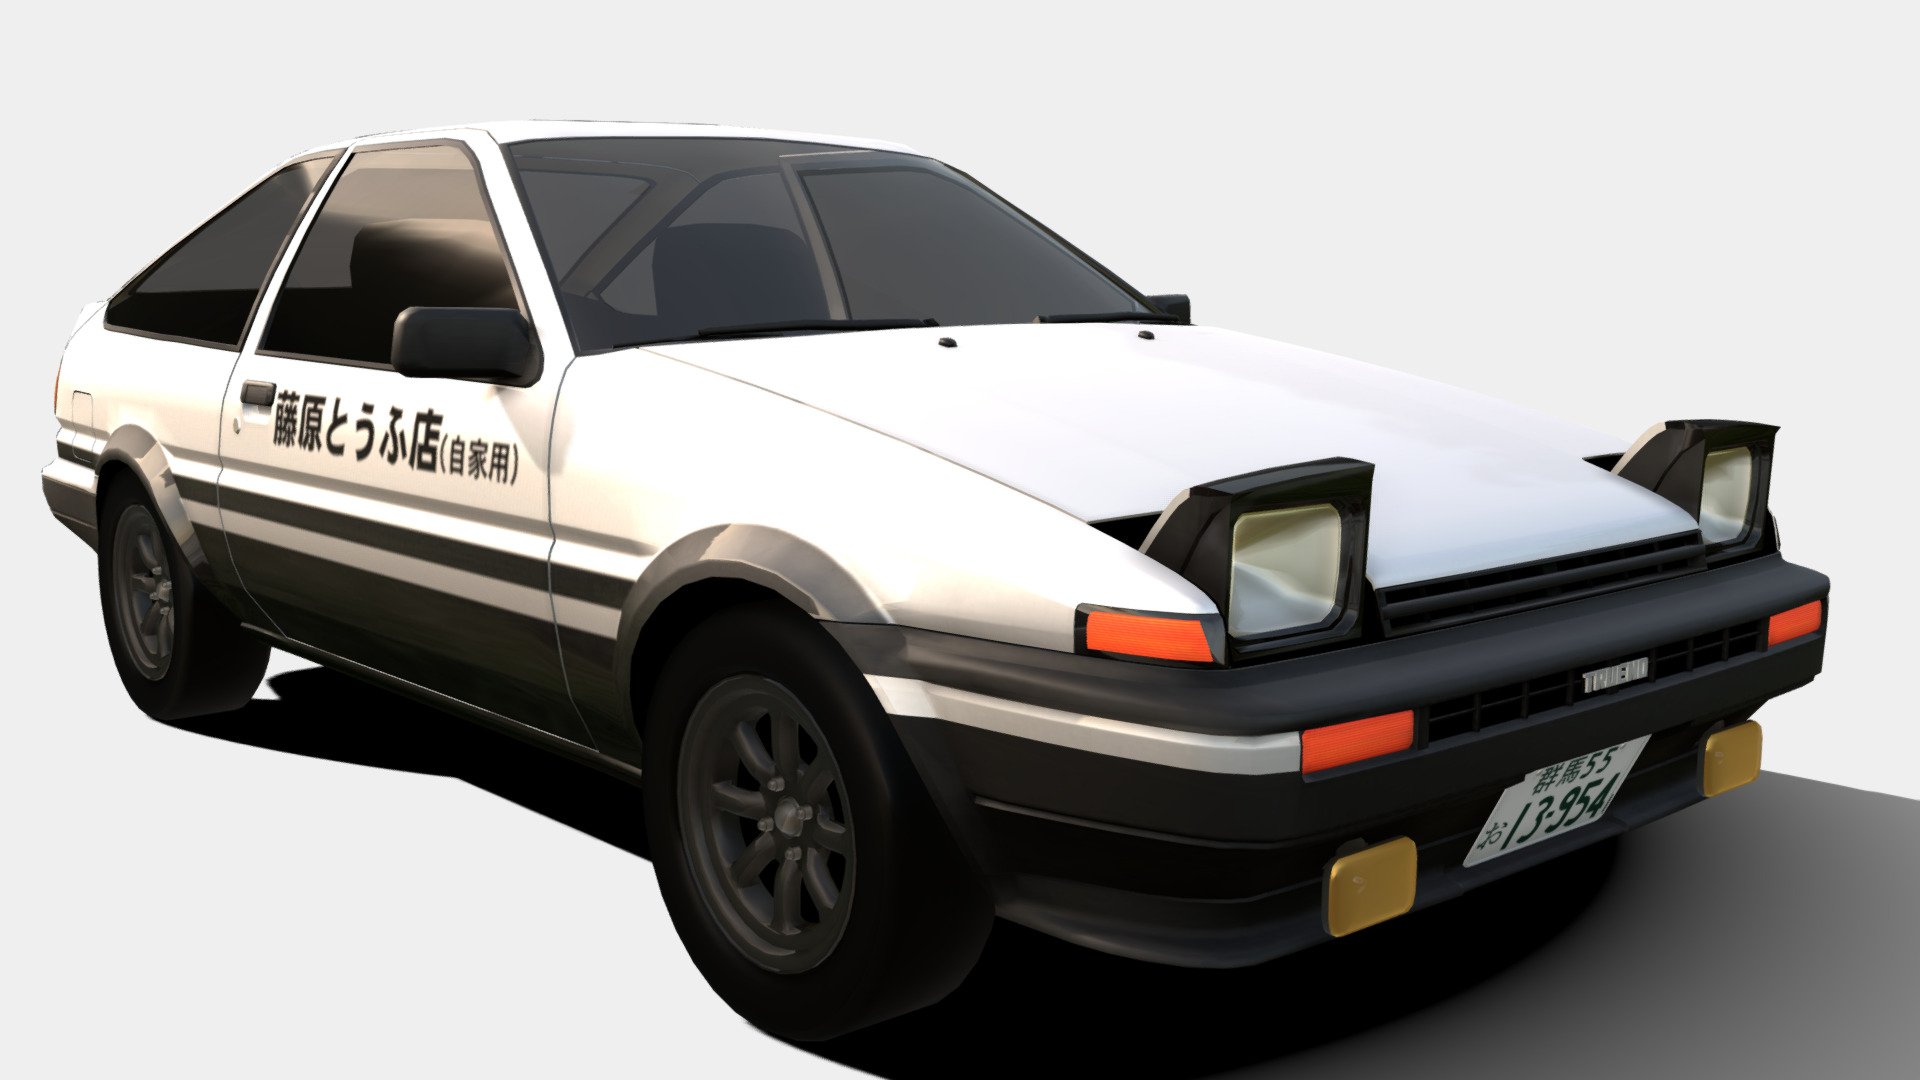 Toyota Ae86 Wallpaper Posted By John Thompson